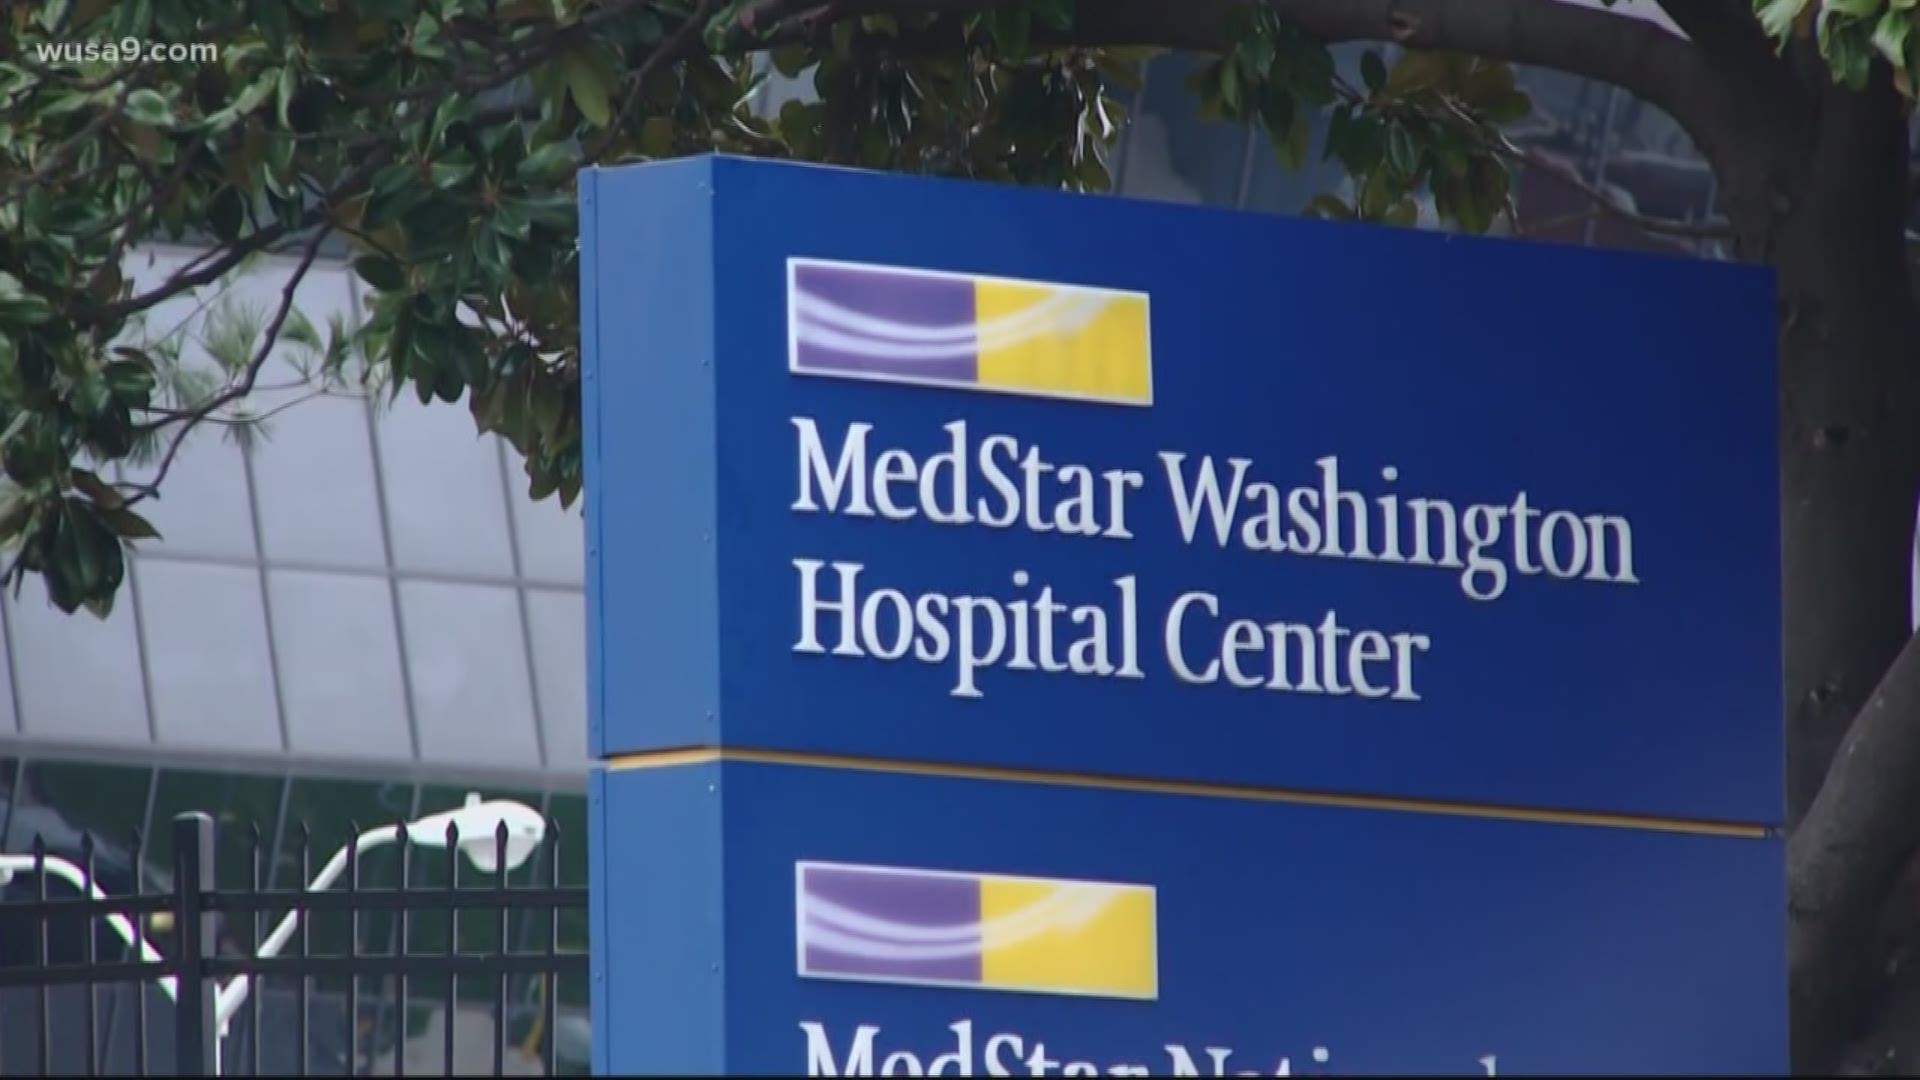 Pandemic forcing some women to change birthing plans at hospitals around the D.C. area. Most hospitals limit visitation to just one person at a time.